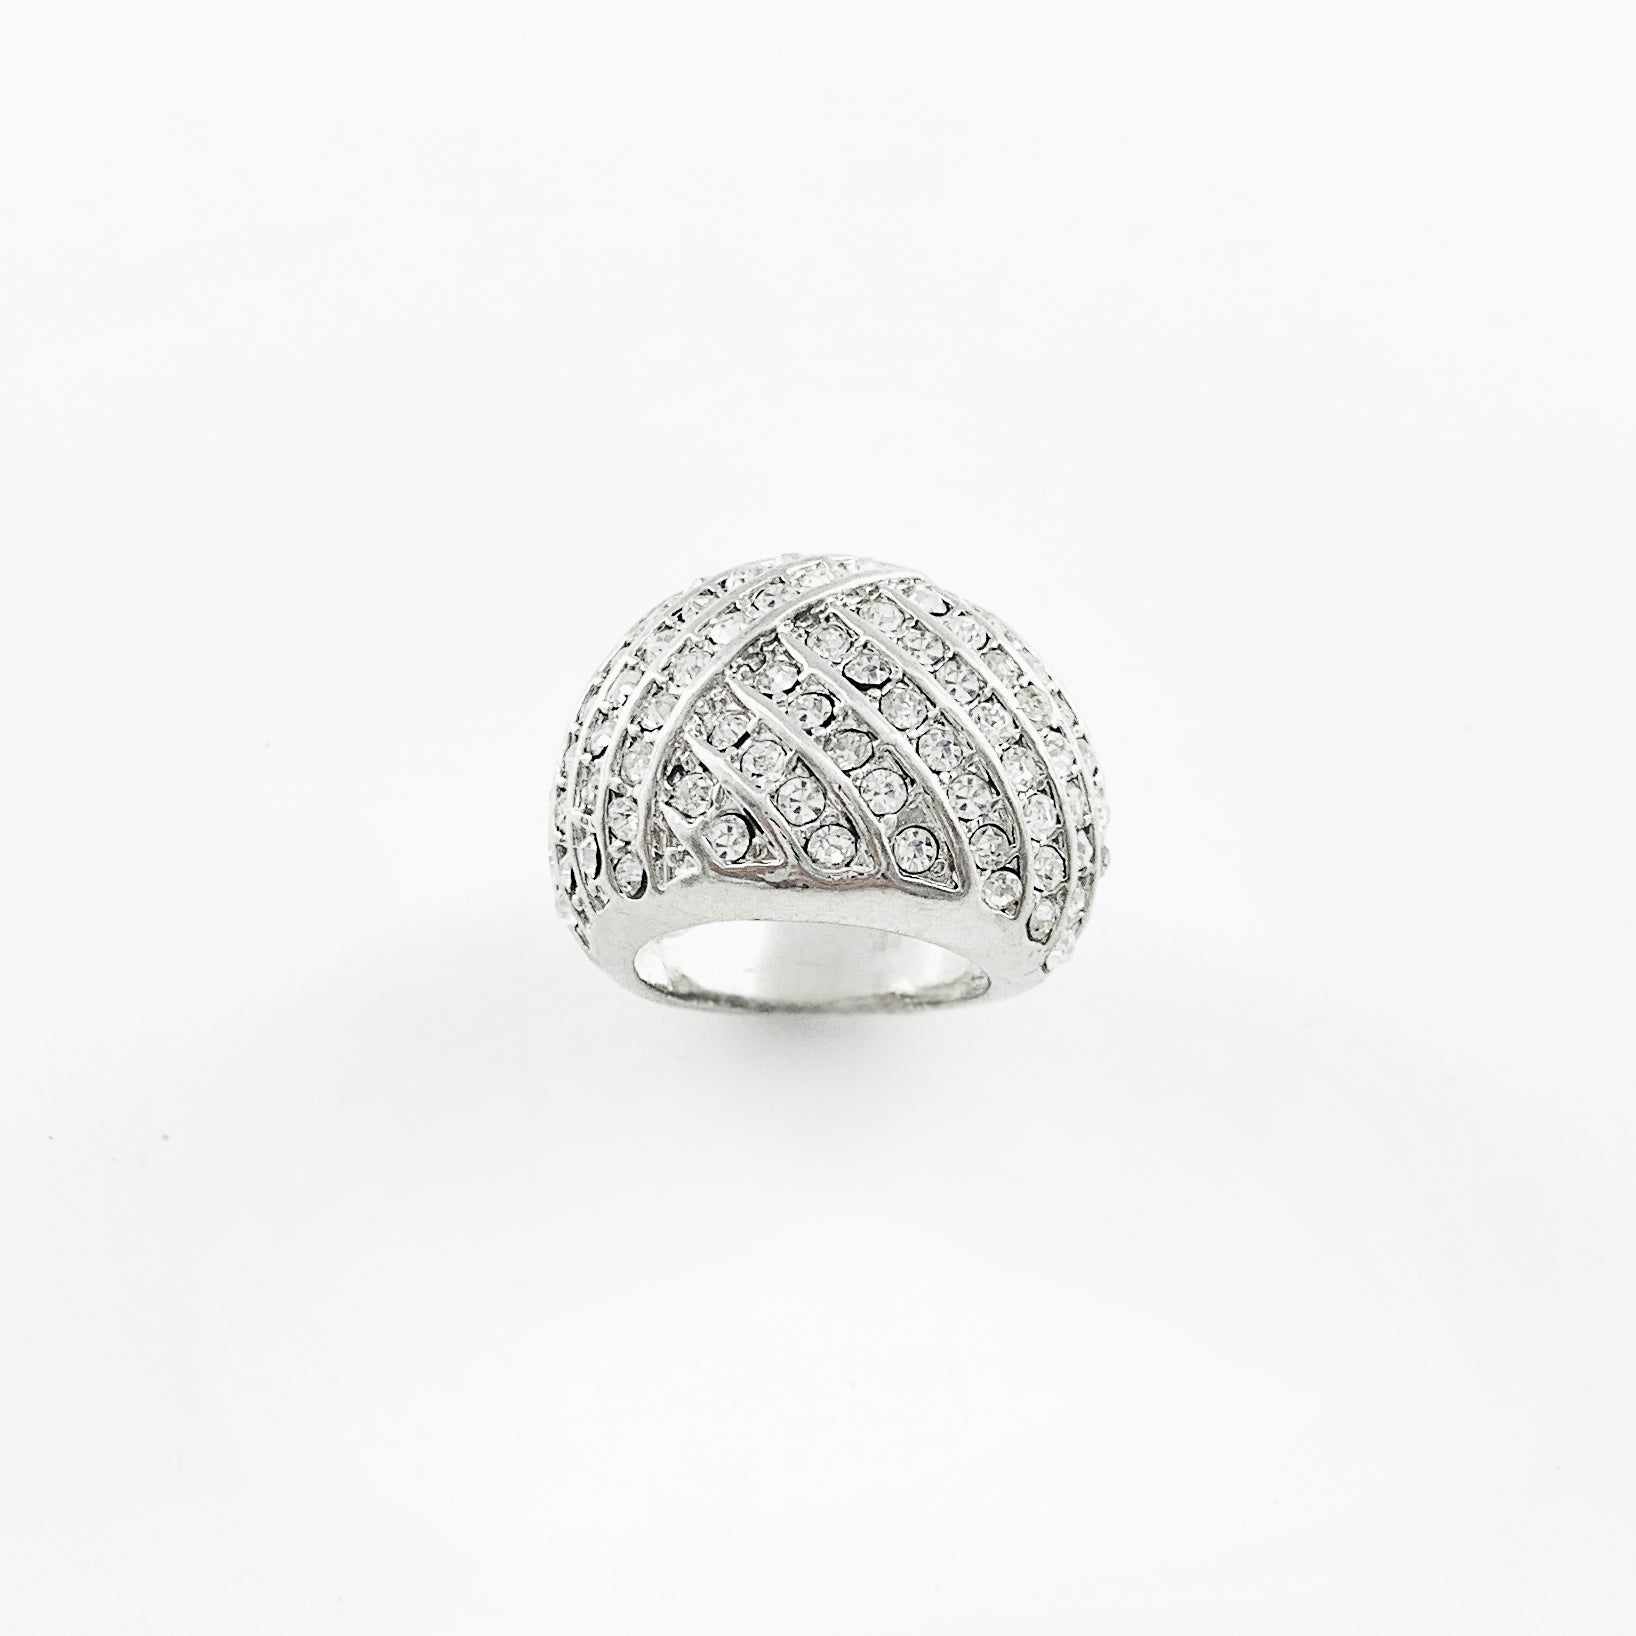 Chunky silver ring with diamante stones